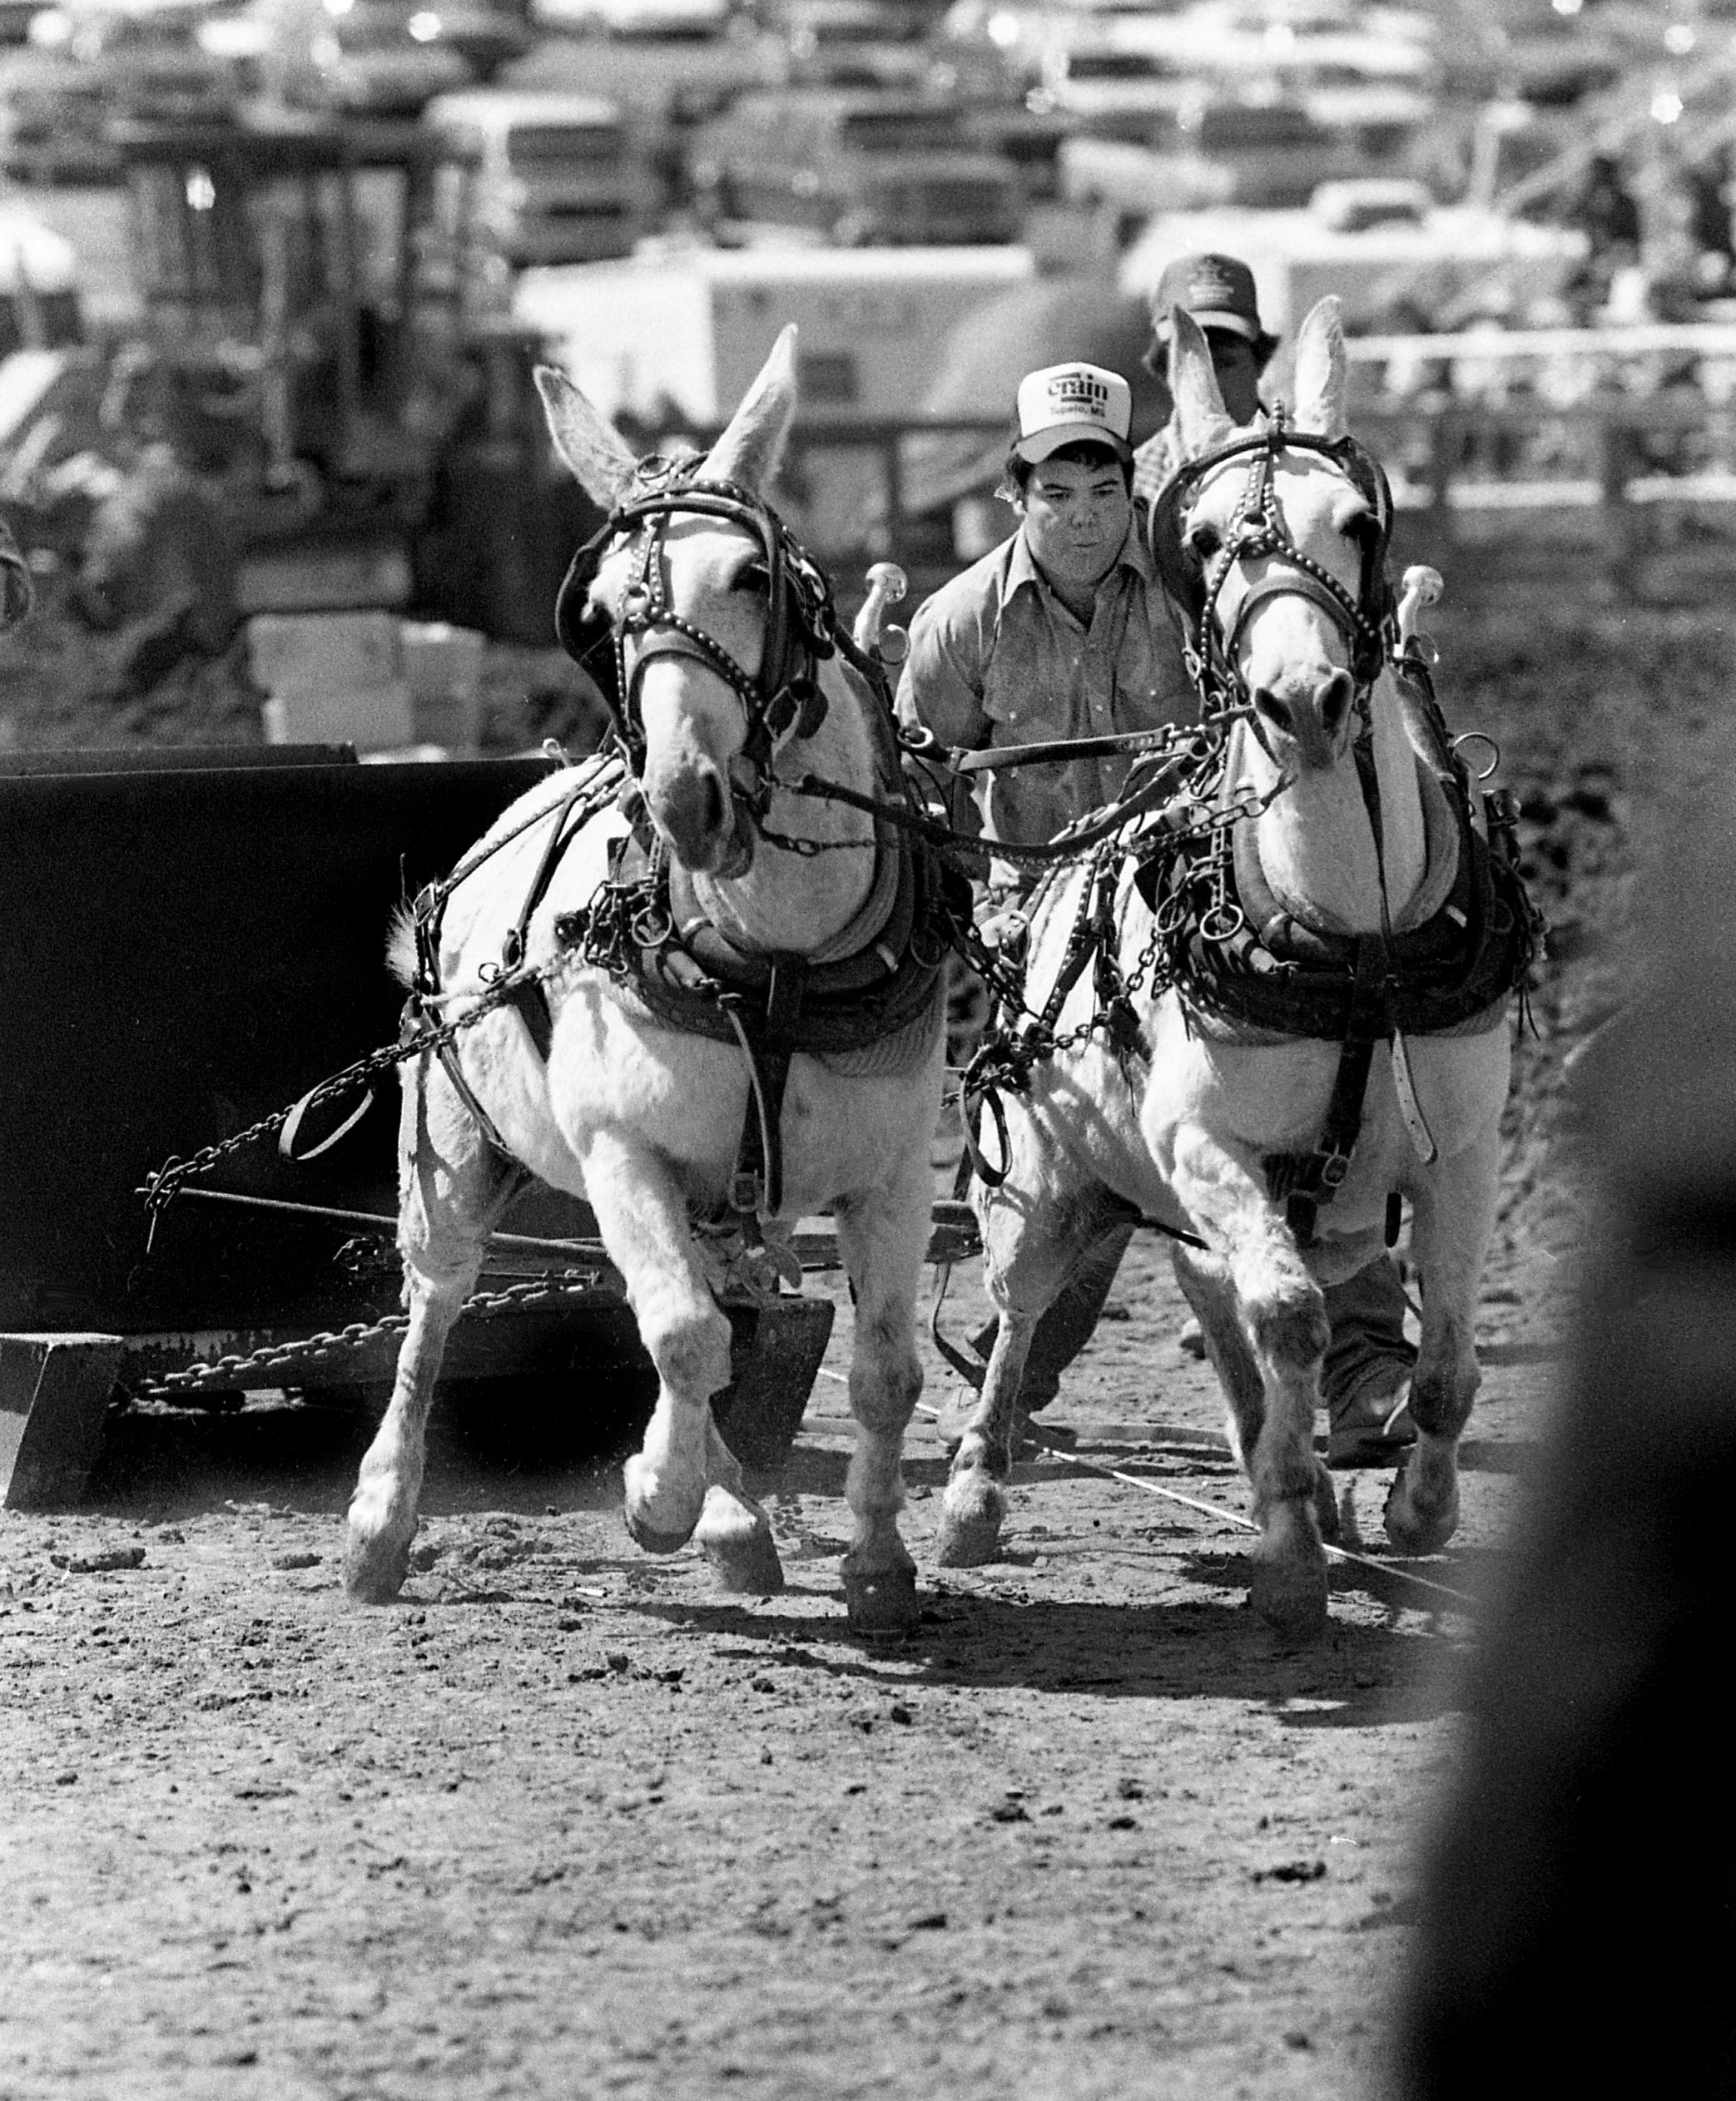 Mule Day 2022 the dates are set, but will it happen?